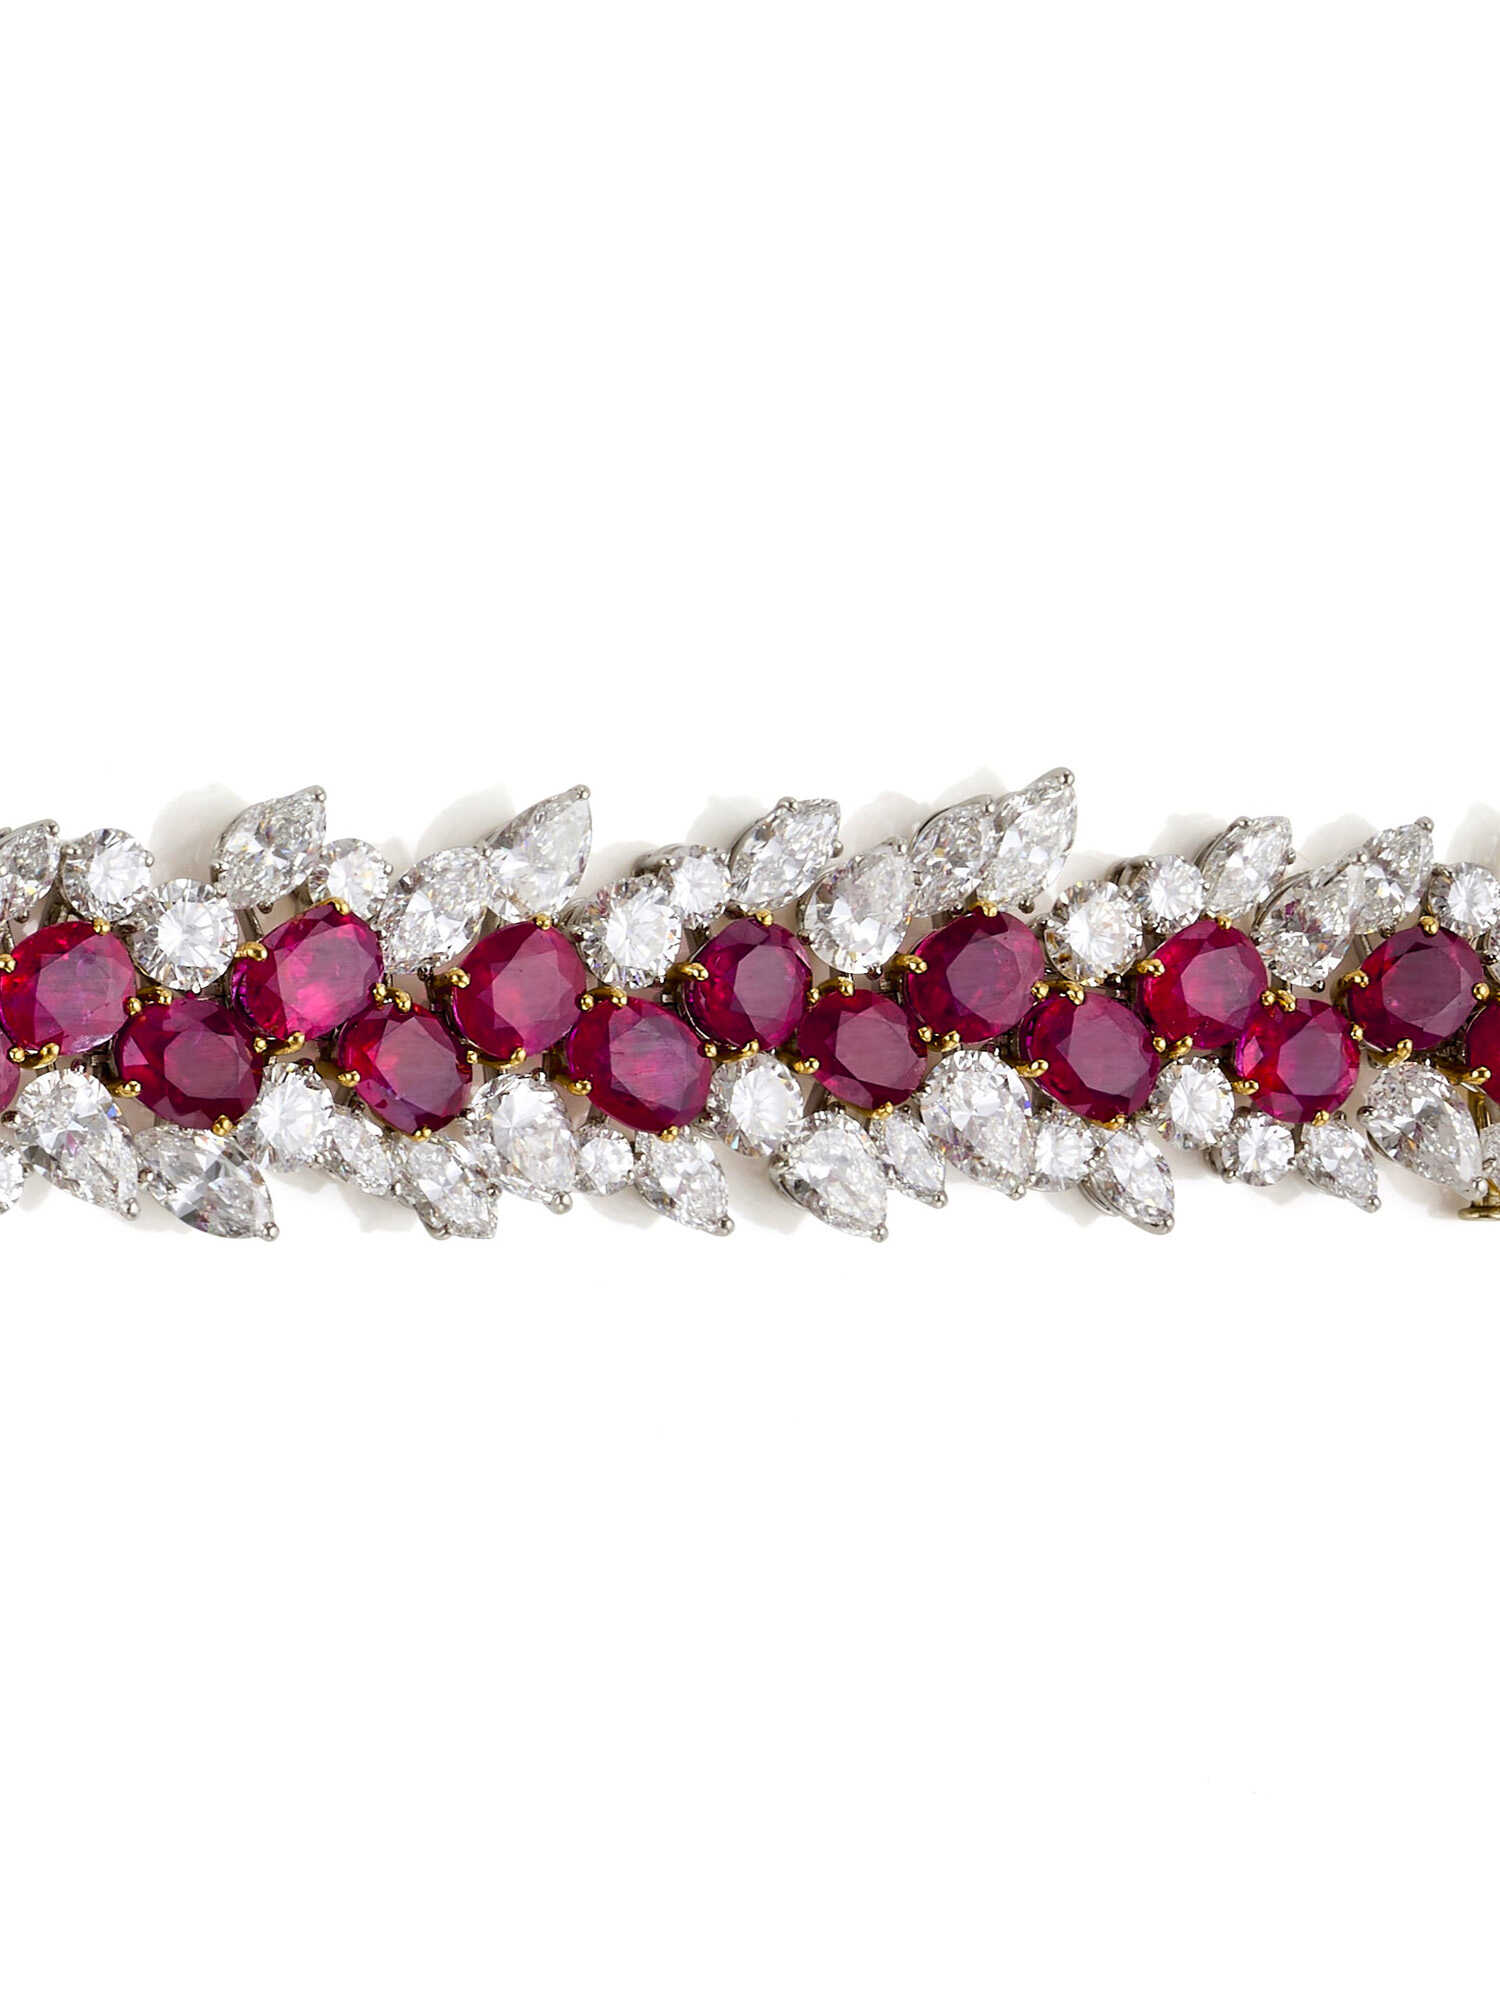 BULGARI | Ruby, diamond, yellow gold and platinum bracelet, rubies in all ct. 45.00 circa, diamonds in all ct. 33.30 circa, g 69.22 circa, length cm 18.0 circa. Signed Bvlgari. In Bvlgari pouch | | Appended gemmological report SSEF n. 137096 21/03/2